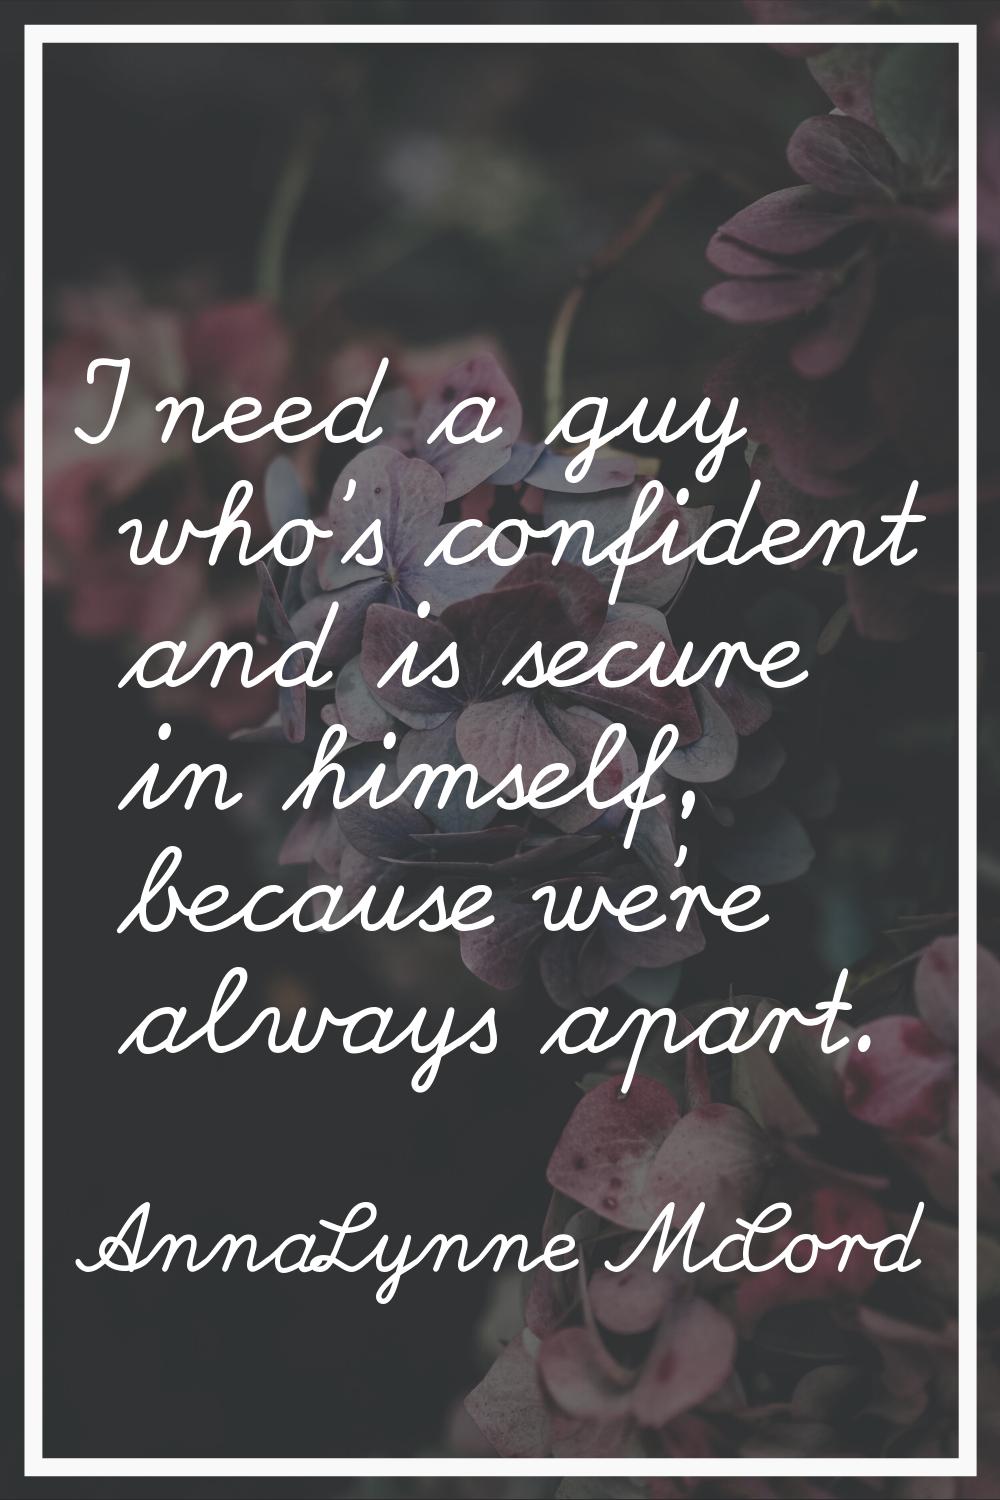 I need a guy who's confident and is secure in himself, because we're always apart.